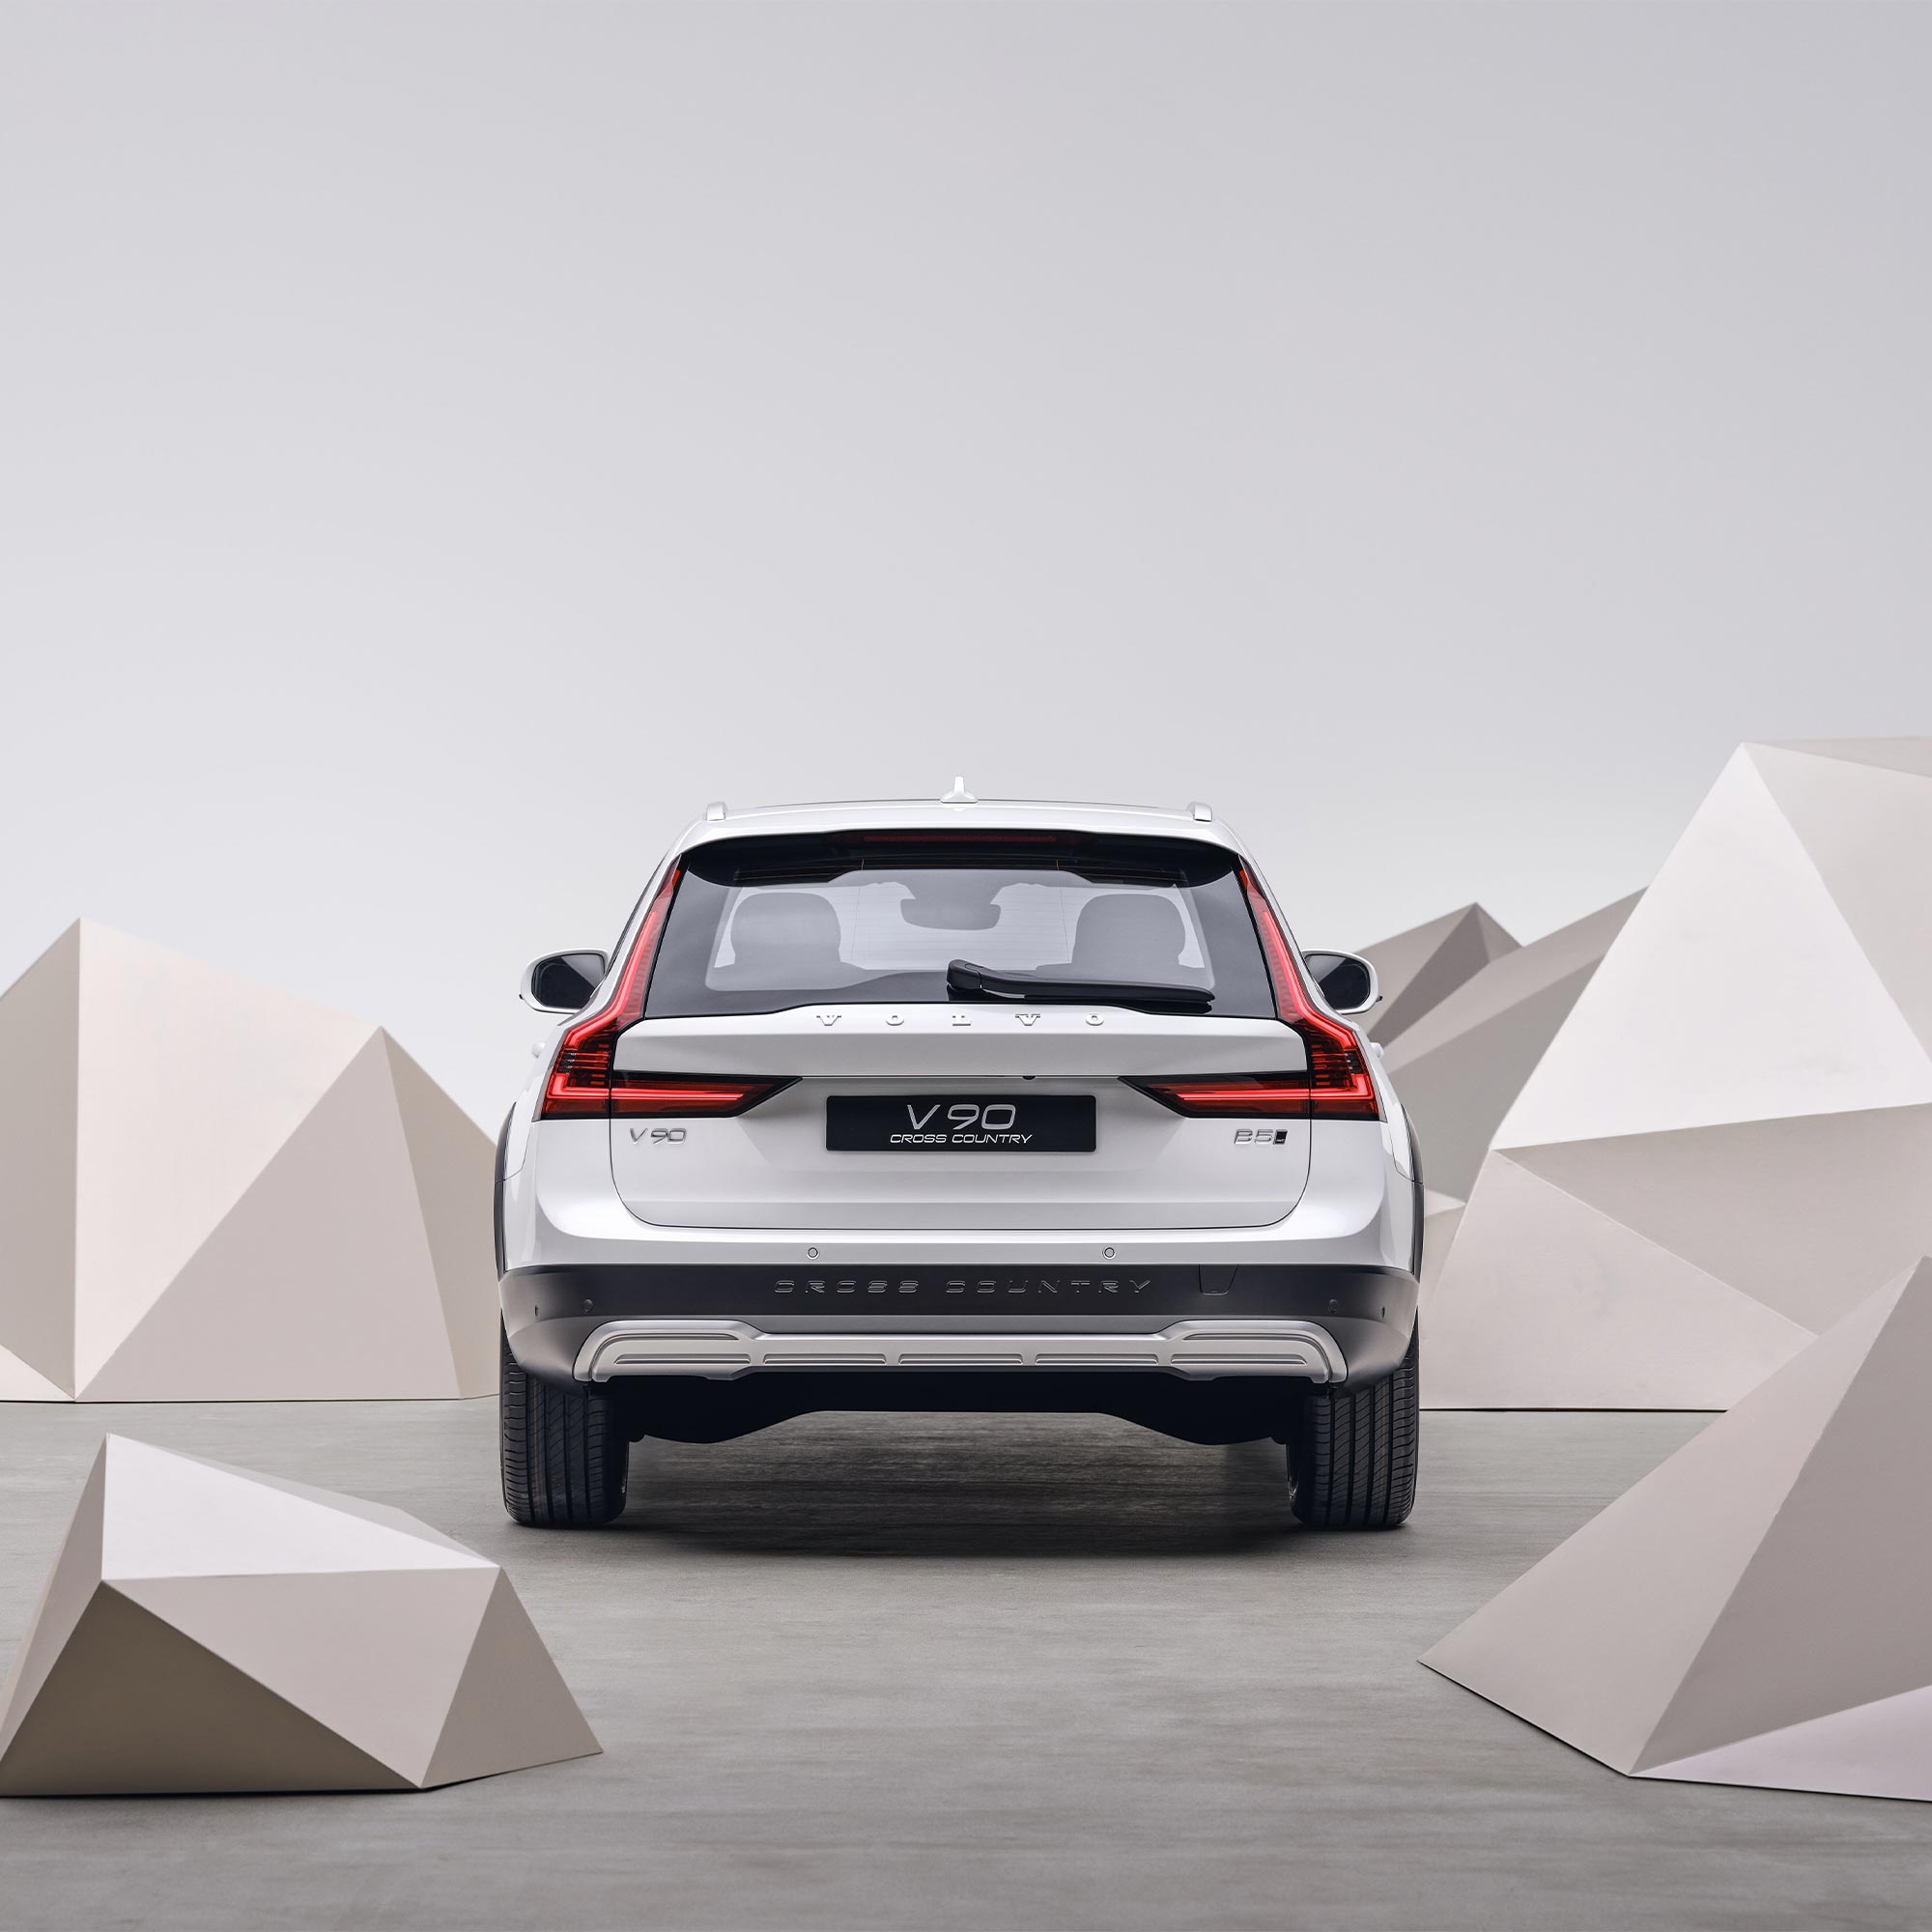 Exterior rear view of the Volvo V90 Cross Country in Crystal White.